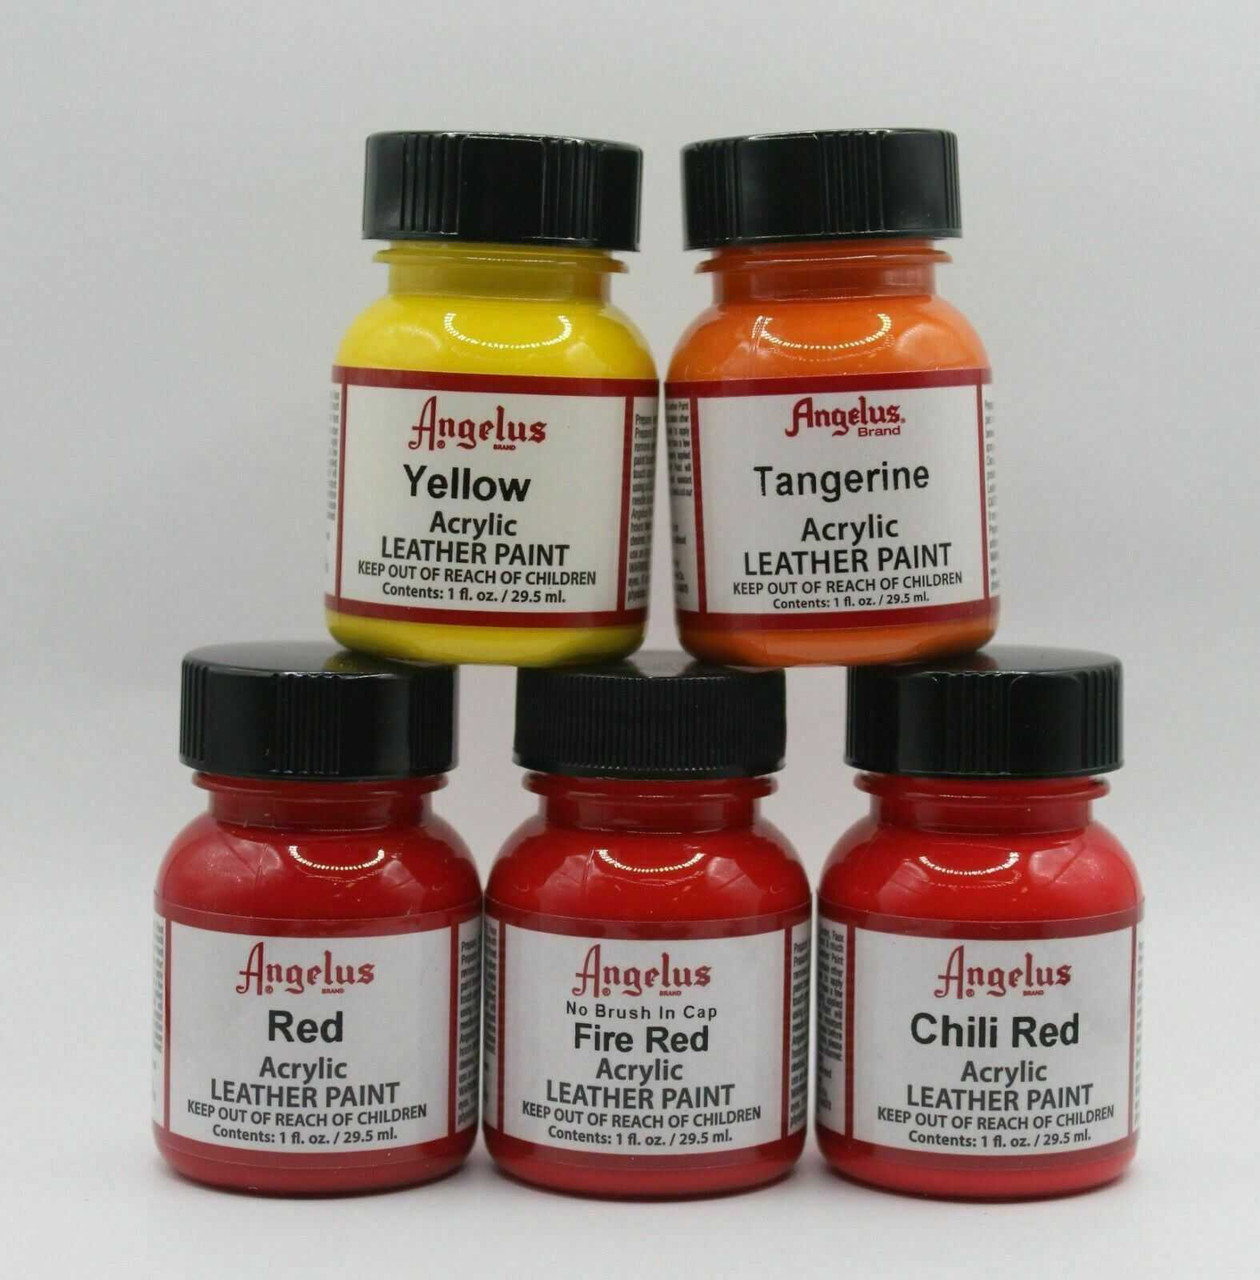 Angelus Acrylic Leather Paint Waterproof Sneaker Paint 1oz - 82 Colors  Available - Shoe & Boot Accessories 4 U